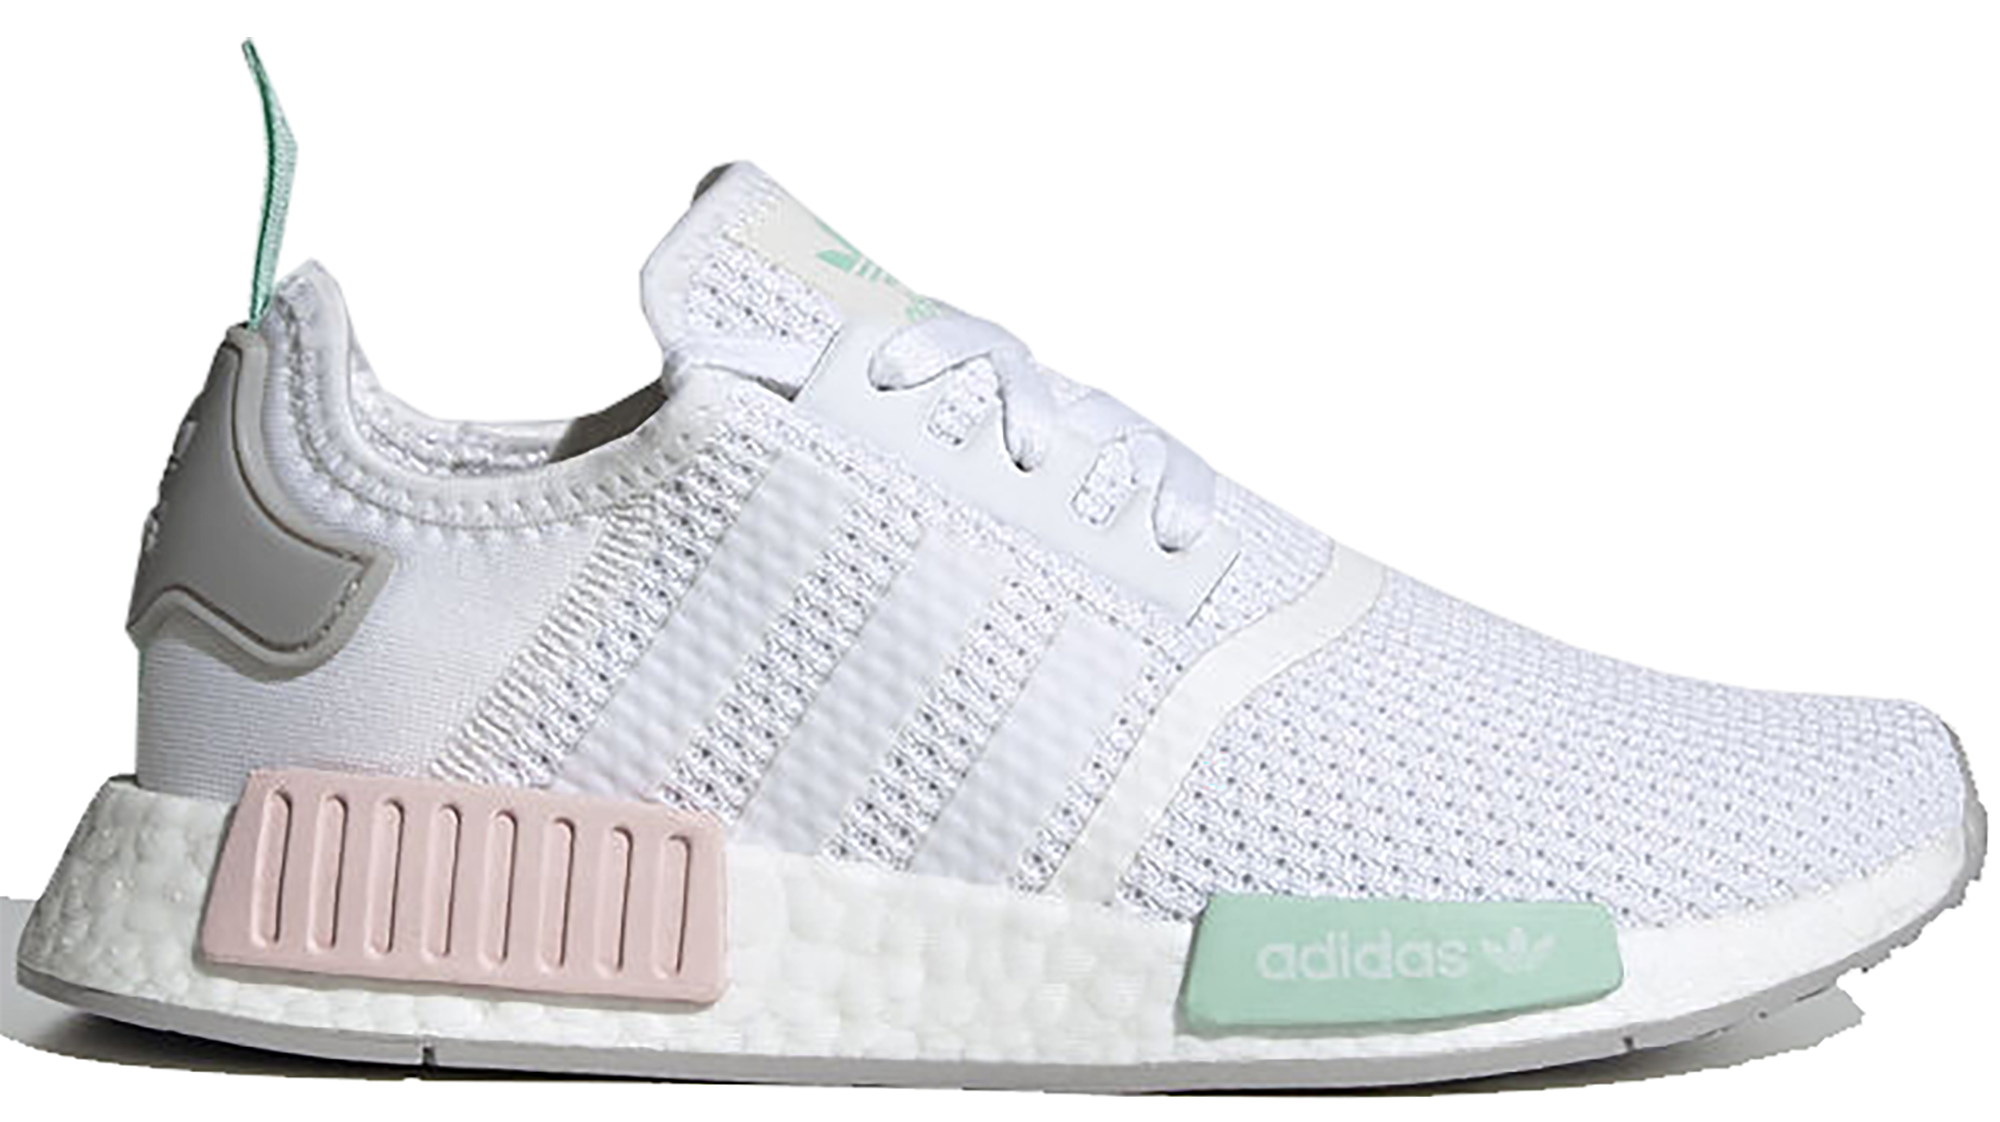 adidas nmd r1 white and grey